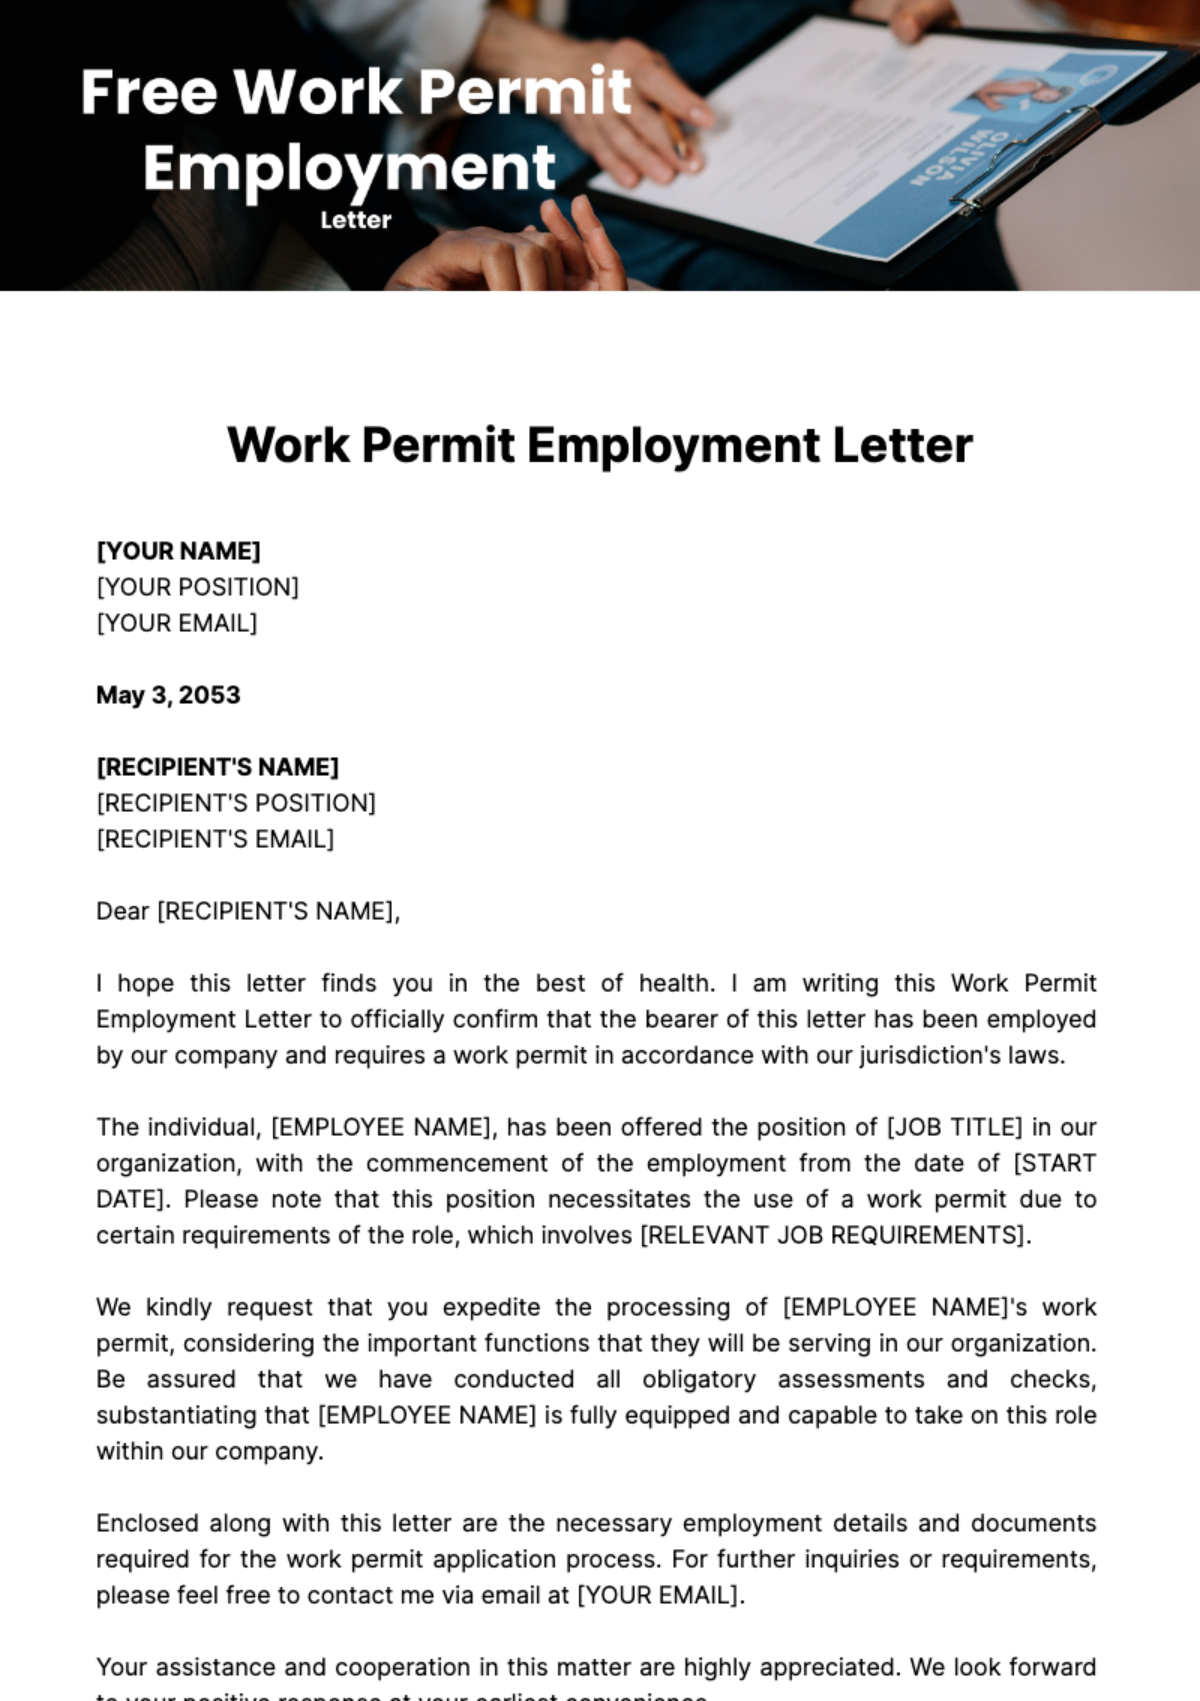 Free Work Permit Employment Letter Template